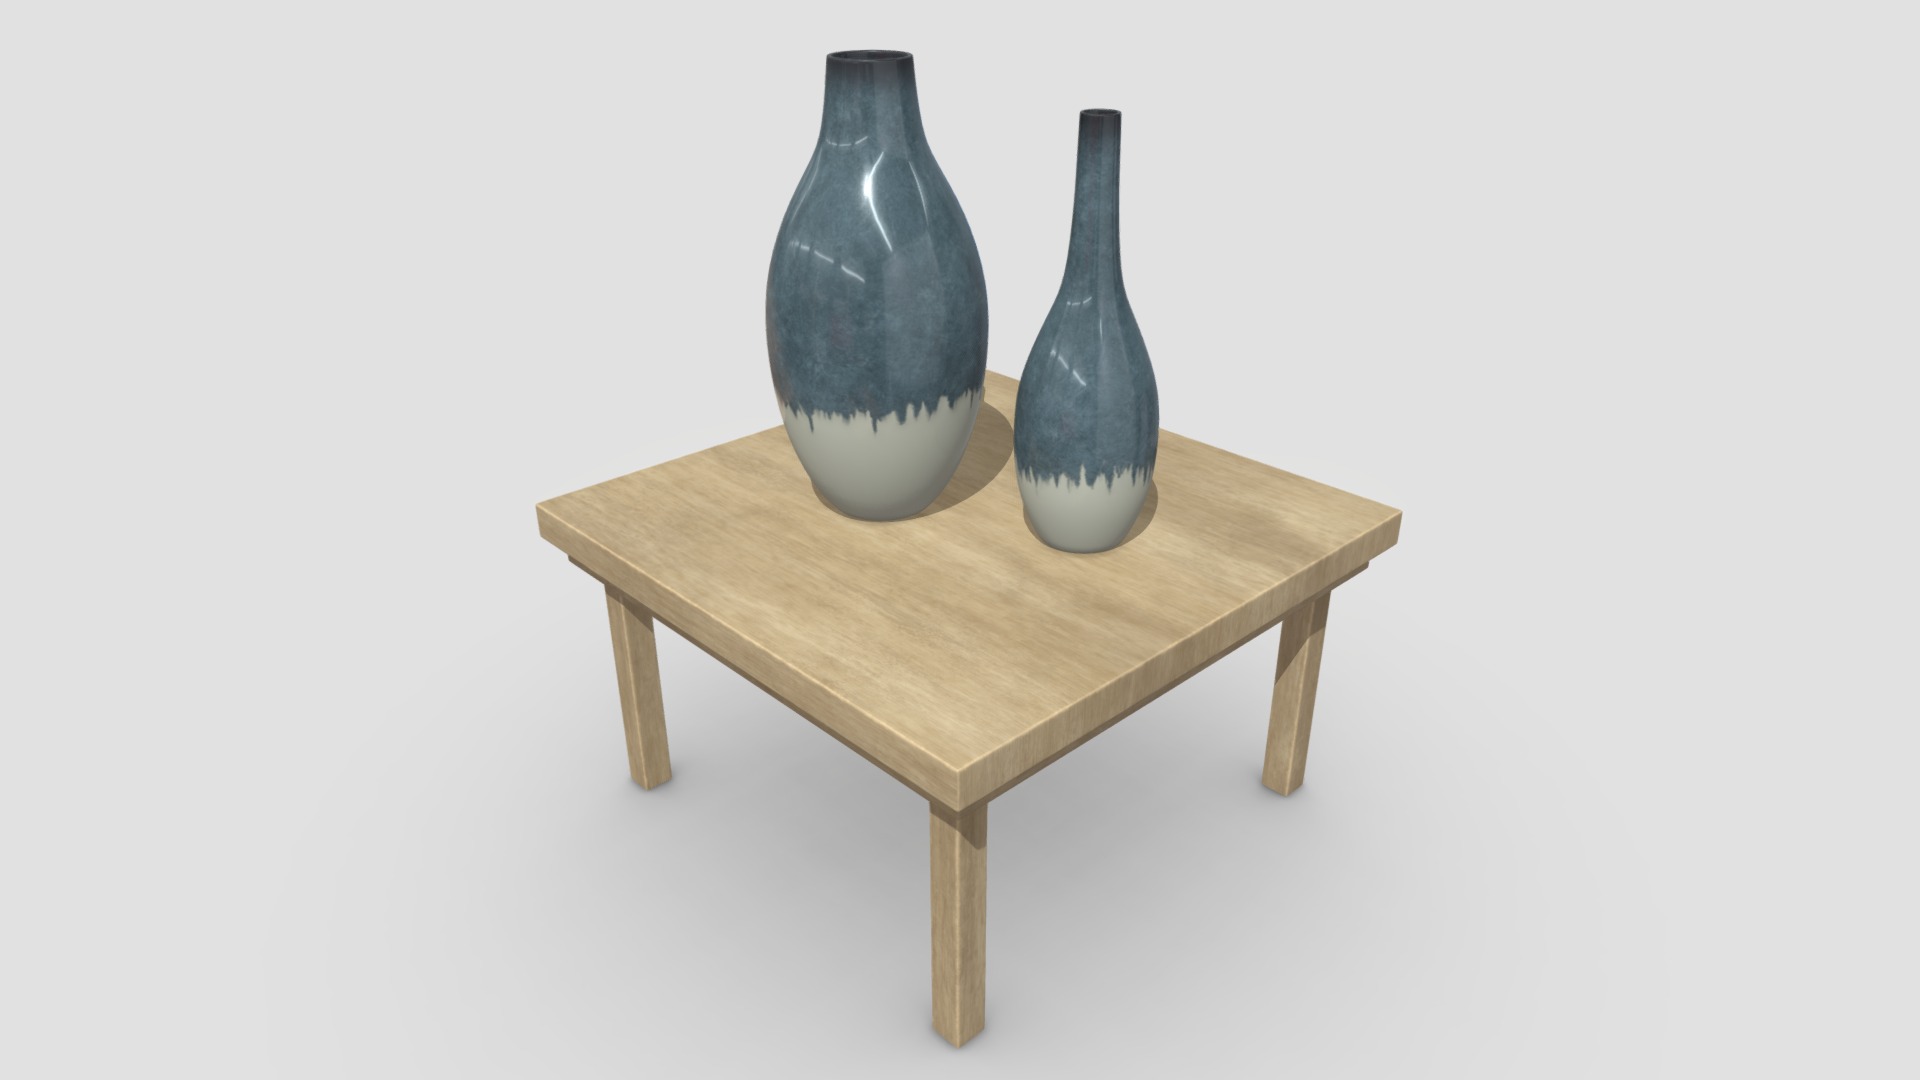 3D model Cascade Vases - This is a 3D model of the Cascade Vases. The 3D model is about a vase and a glass on a table.